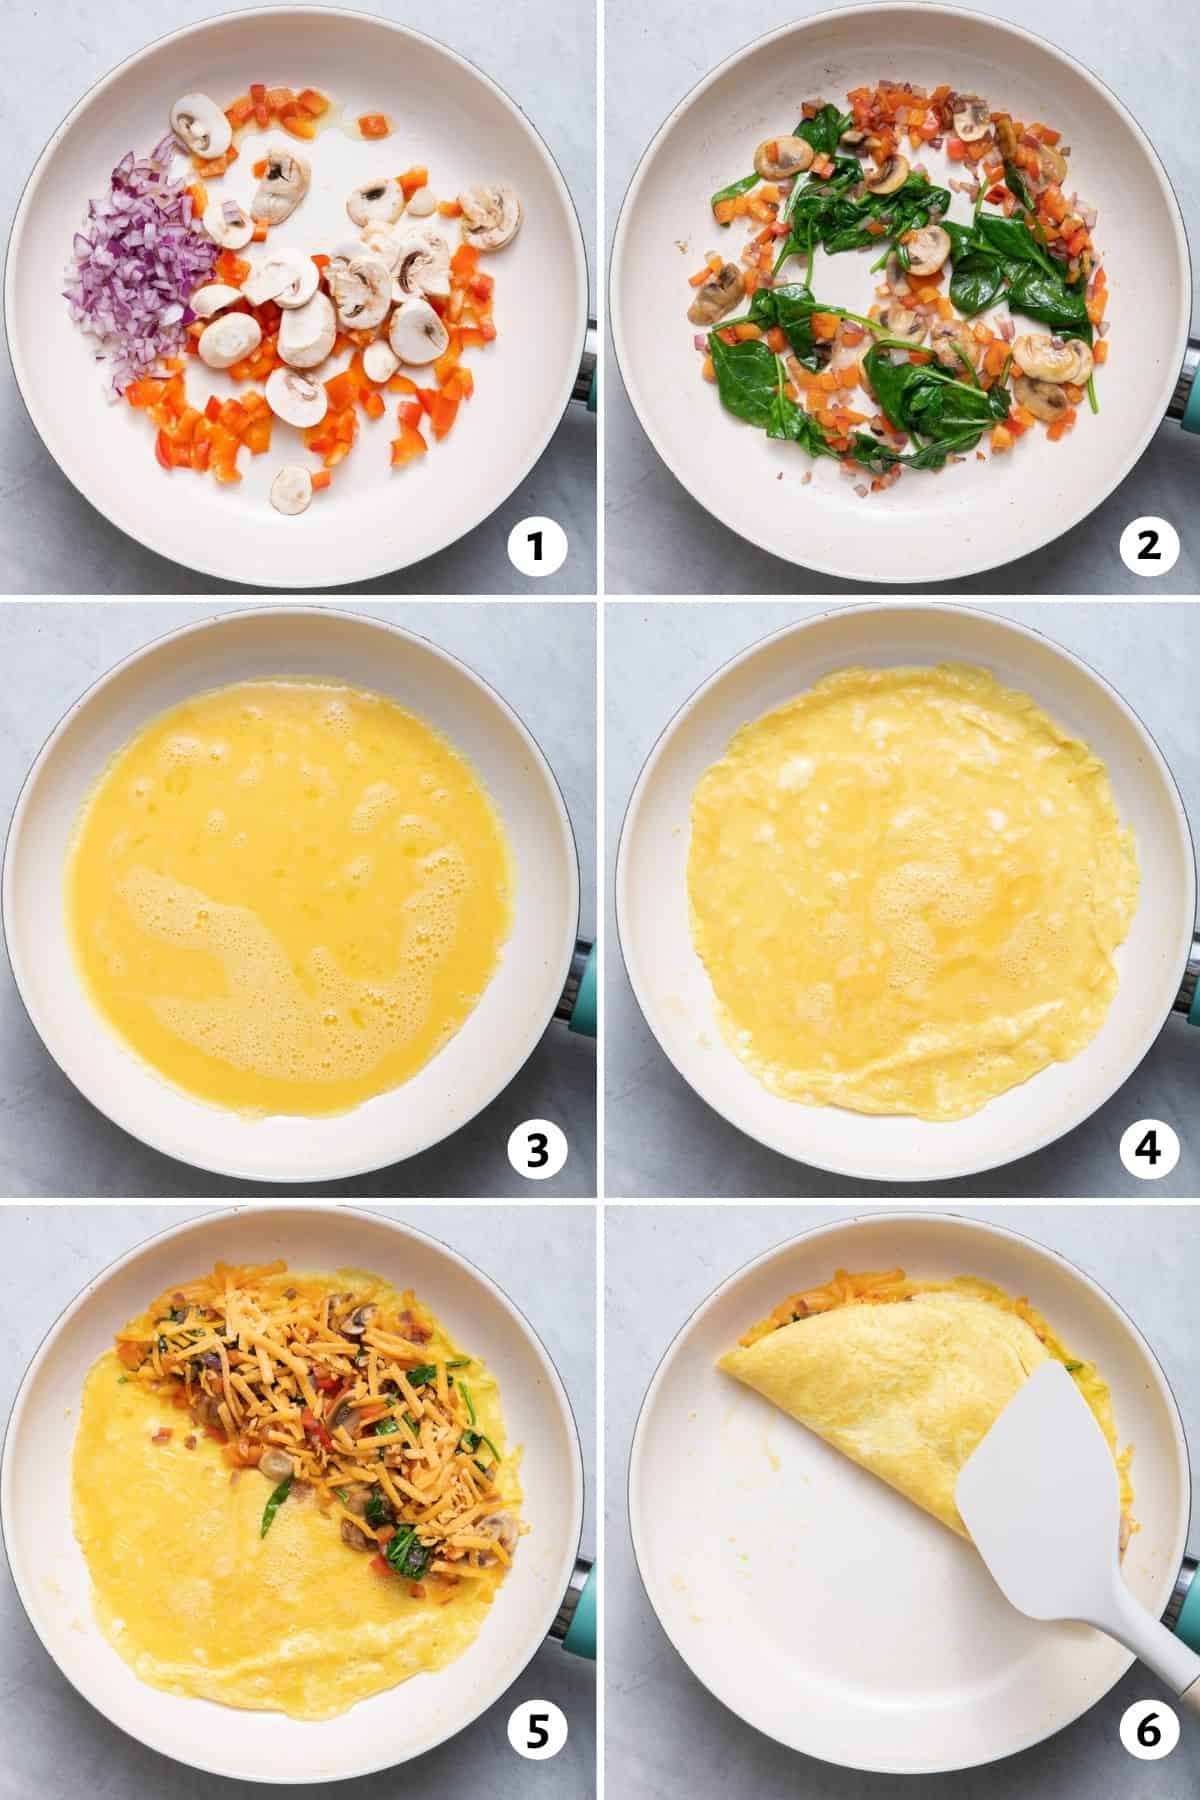 6 image collage showing veggies getting cooked, egg on pan, then veggies stuffed in omelette, then folded over